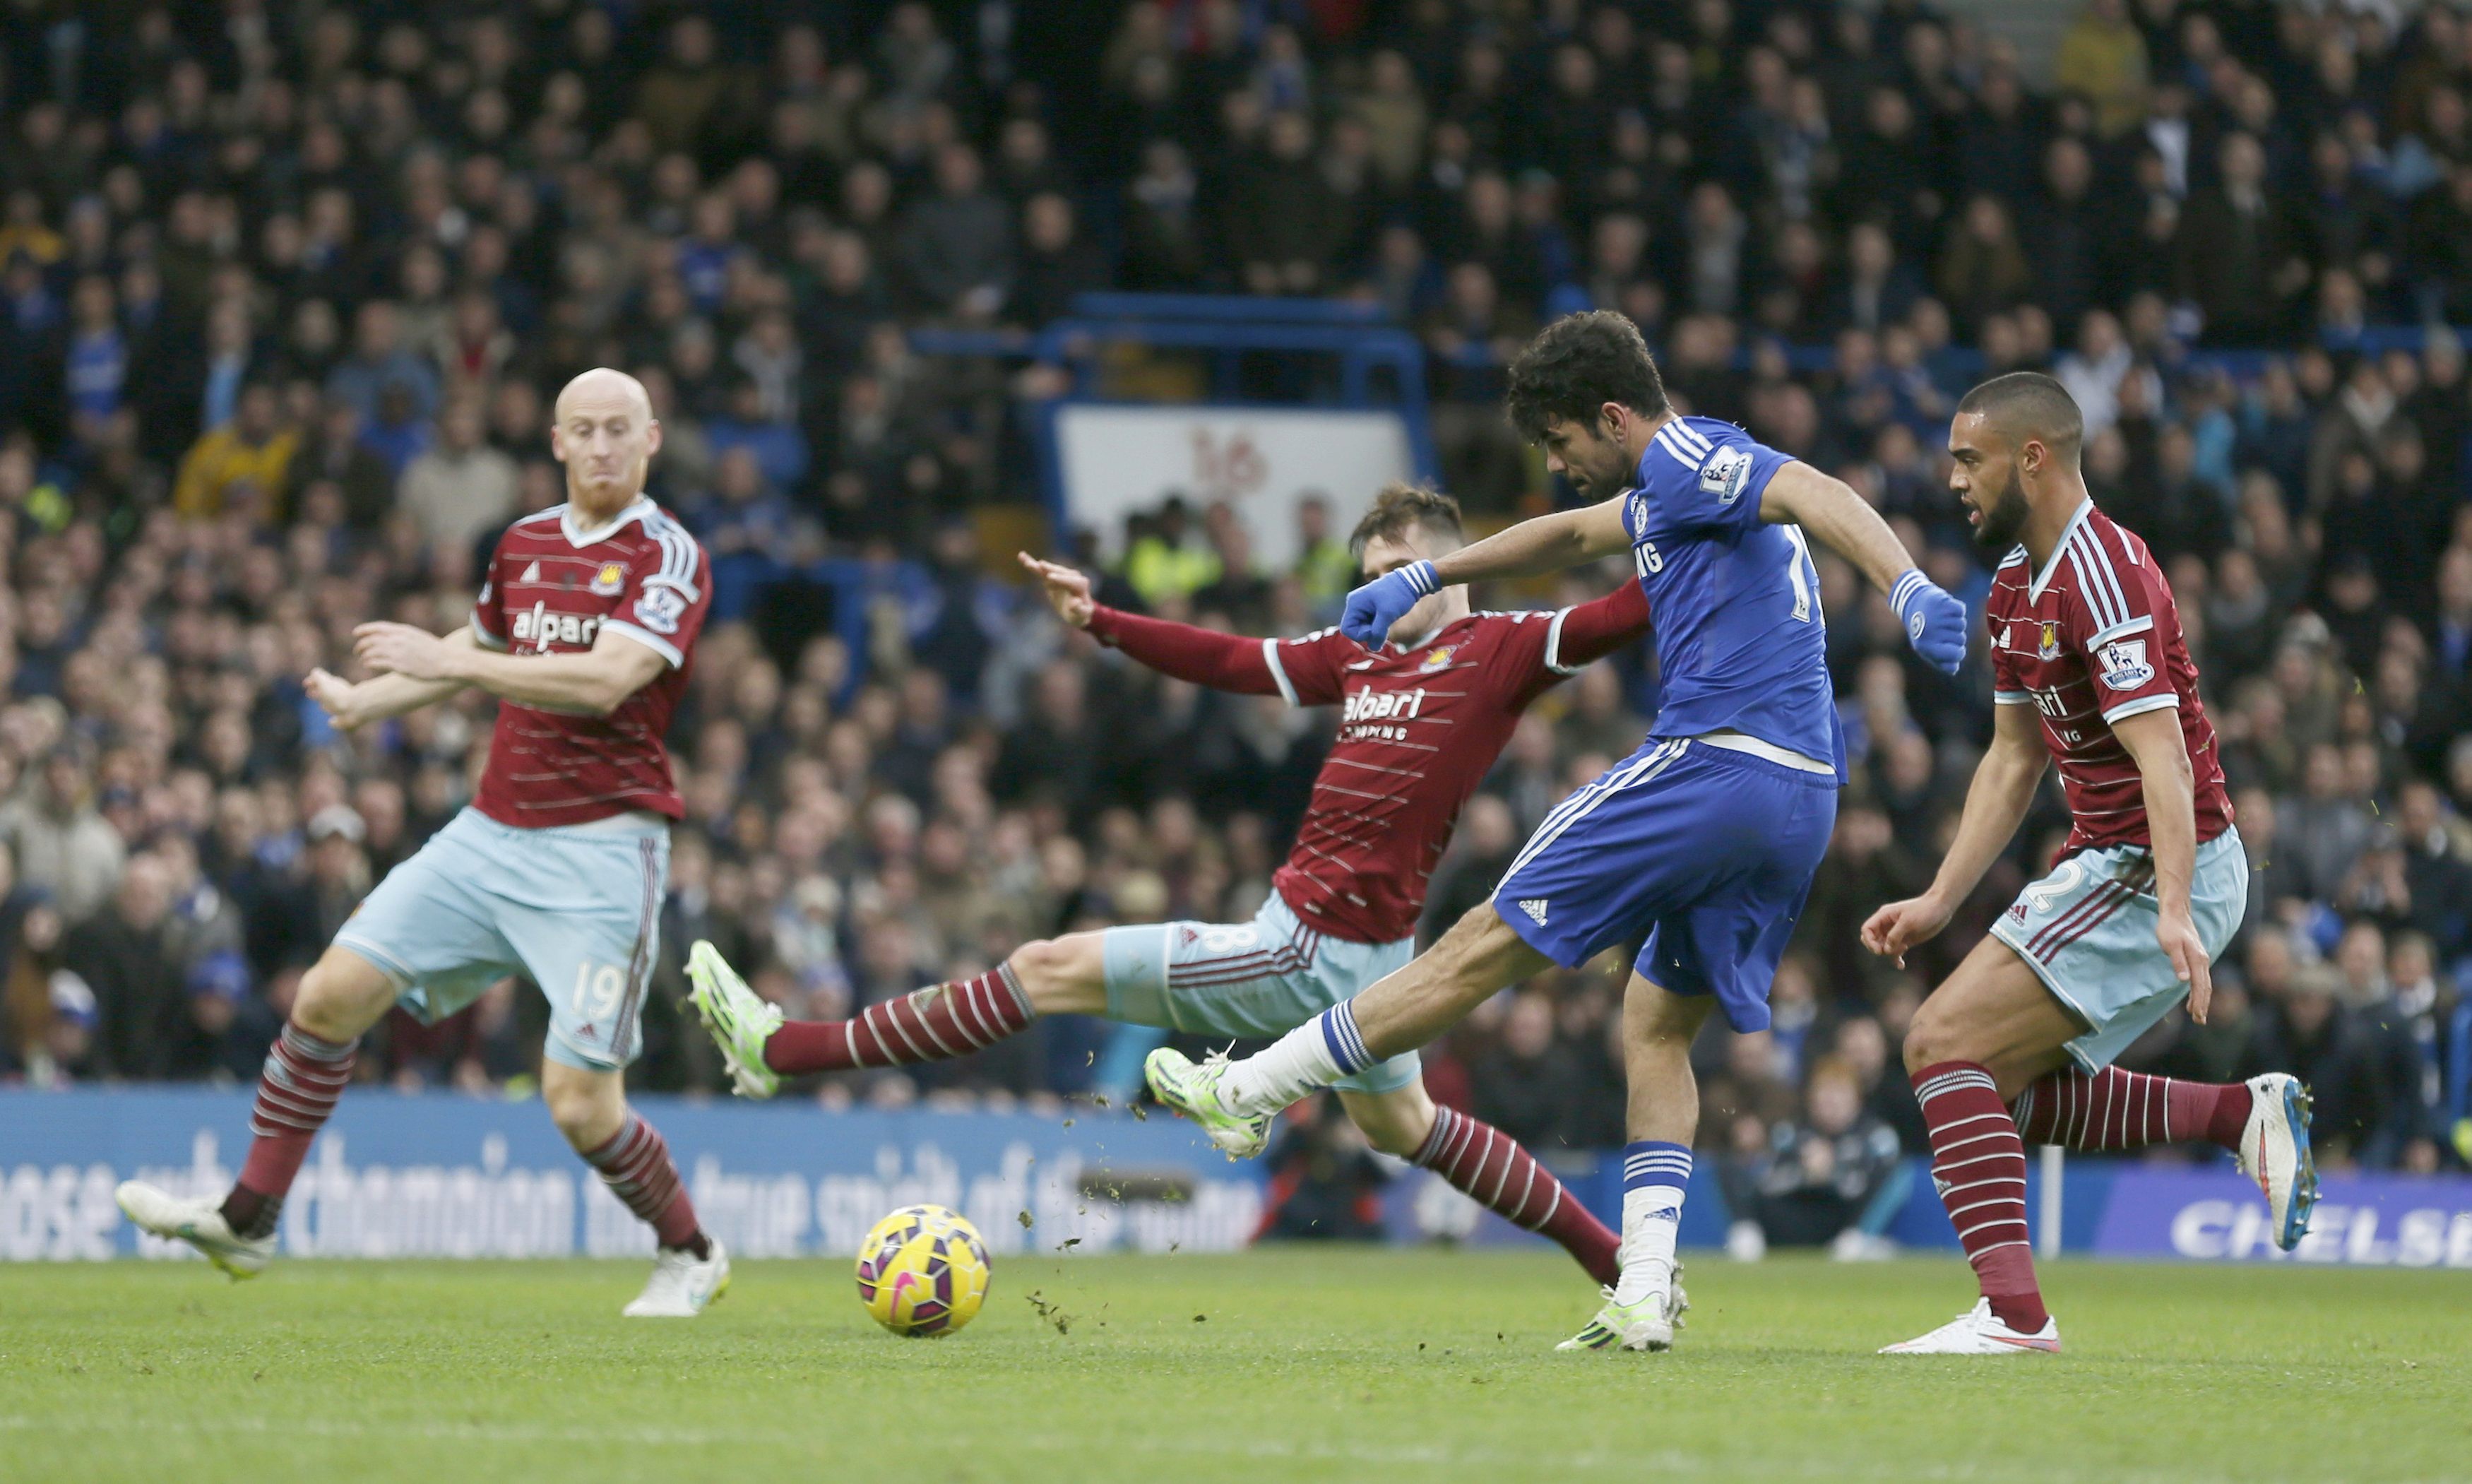 Chelsea's Diego Costa (2nd R) shoots to score a goal against West Ham United during their English Premier League soccer match at Stamford Bridge in London, December 26, 2014. REUTERS/Stefan Wermuth (BRITAIN - Tags: SOCCER SPORT TPX IMAGES OF THE DAY) FOR EDITORIAL USE ONLY. NOT FOR SALE FOR MARKETING OR ADVERTISING CAMPAIGNS. EDITORIAL USE ONLY. NO USE WITH UNAUTHORIZED AUDIO, VIDEO, DATA, FIXTURE LISTS, CLUB/LEAGUE LOGOS OR 'LIVE' SERVICES. ONLINE IN-MATCH USE LIMITED TO 45 IMAGES, NO VIDEO EMULATION. NO USE IN BETTING, GAMES OR SINGLE CLUB/LEAGUE/PLAYER PUBLICATIONS.